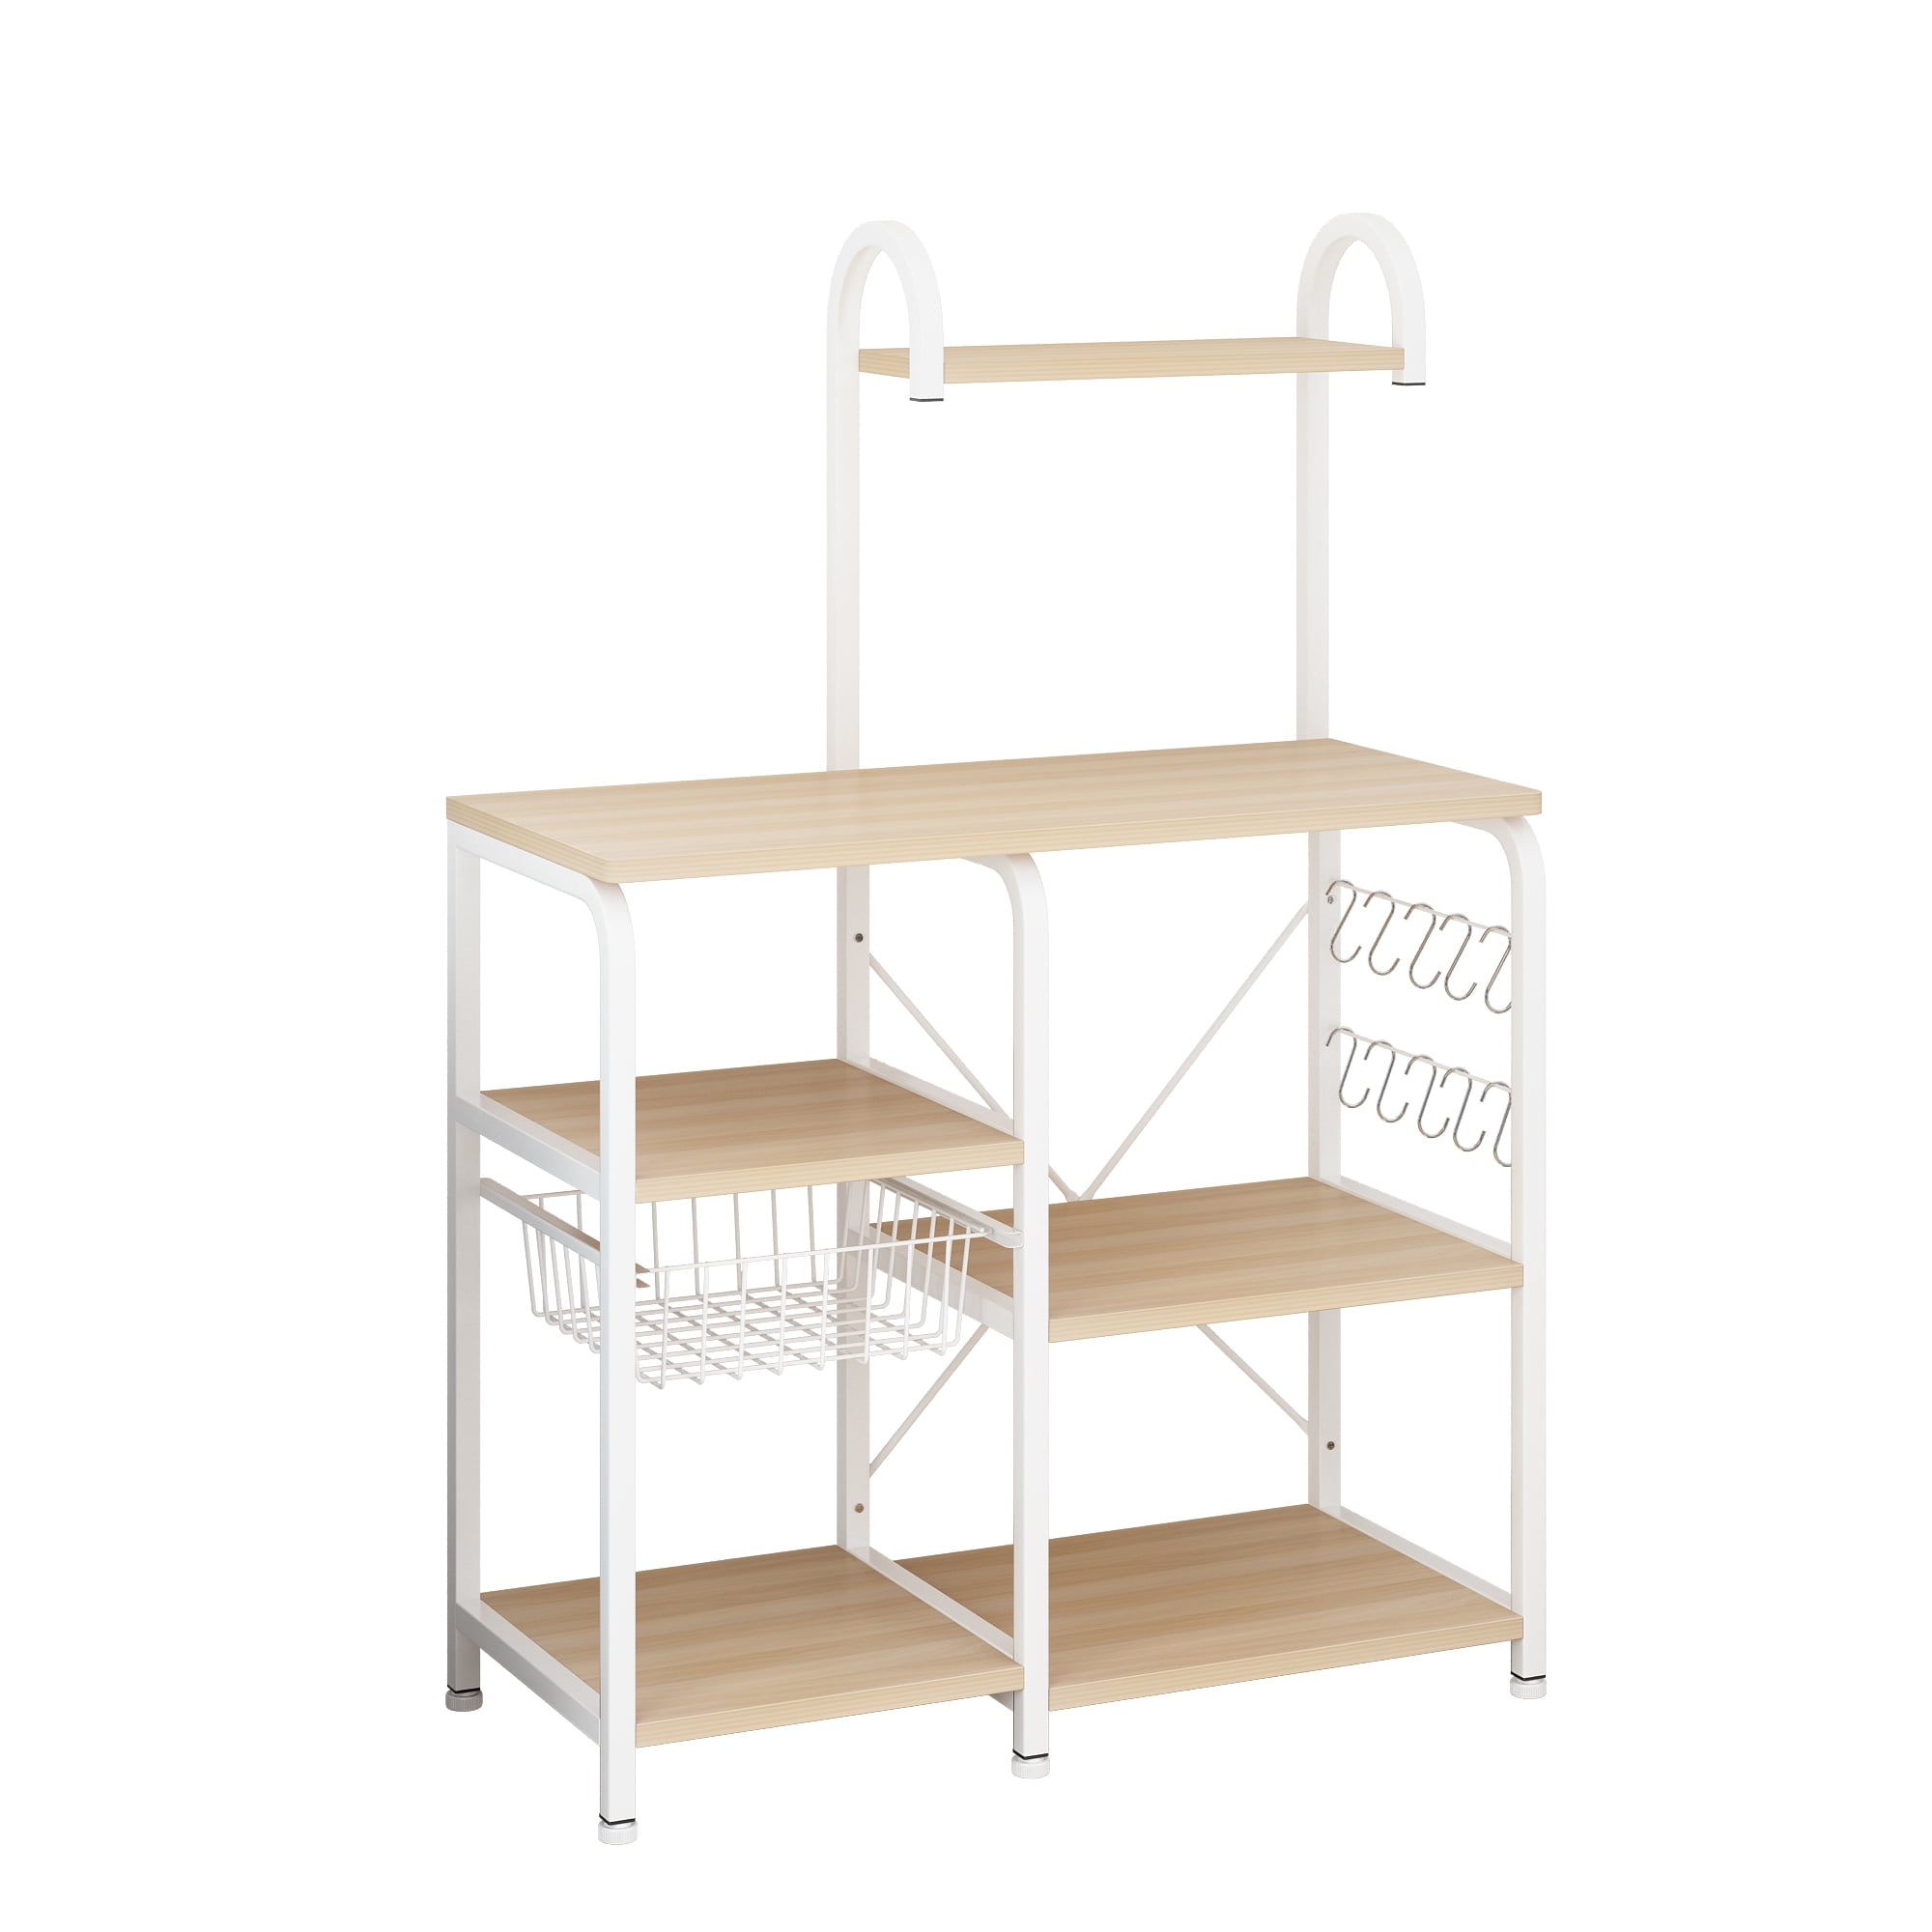 NAIYUFA Kitchen Bakers Rack with Baskets,5-Tier Utility Storage Wood Shelf  with Hooks, Microwave Oven Stand Rack,Vintage Grey 